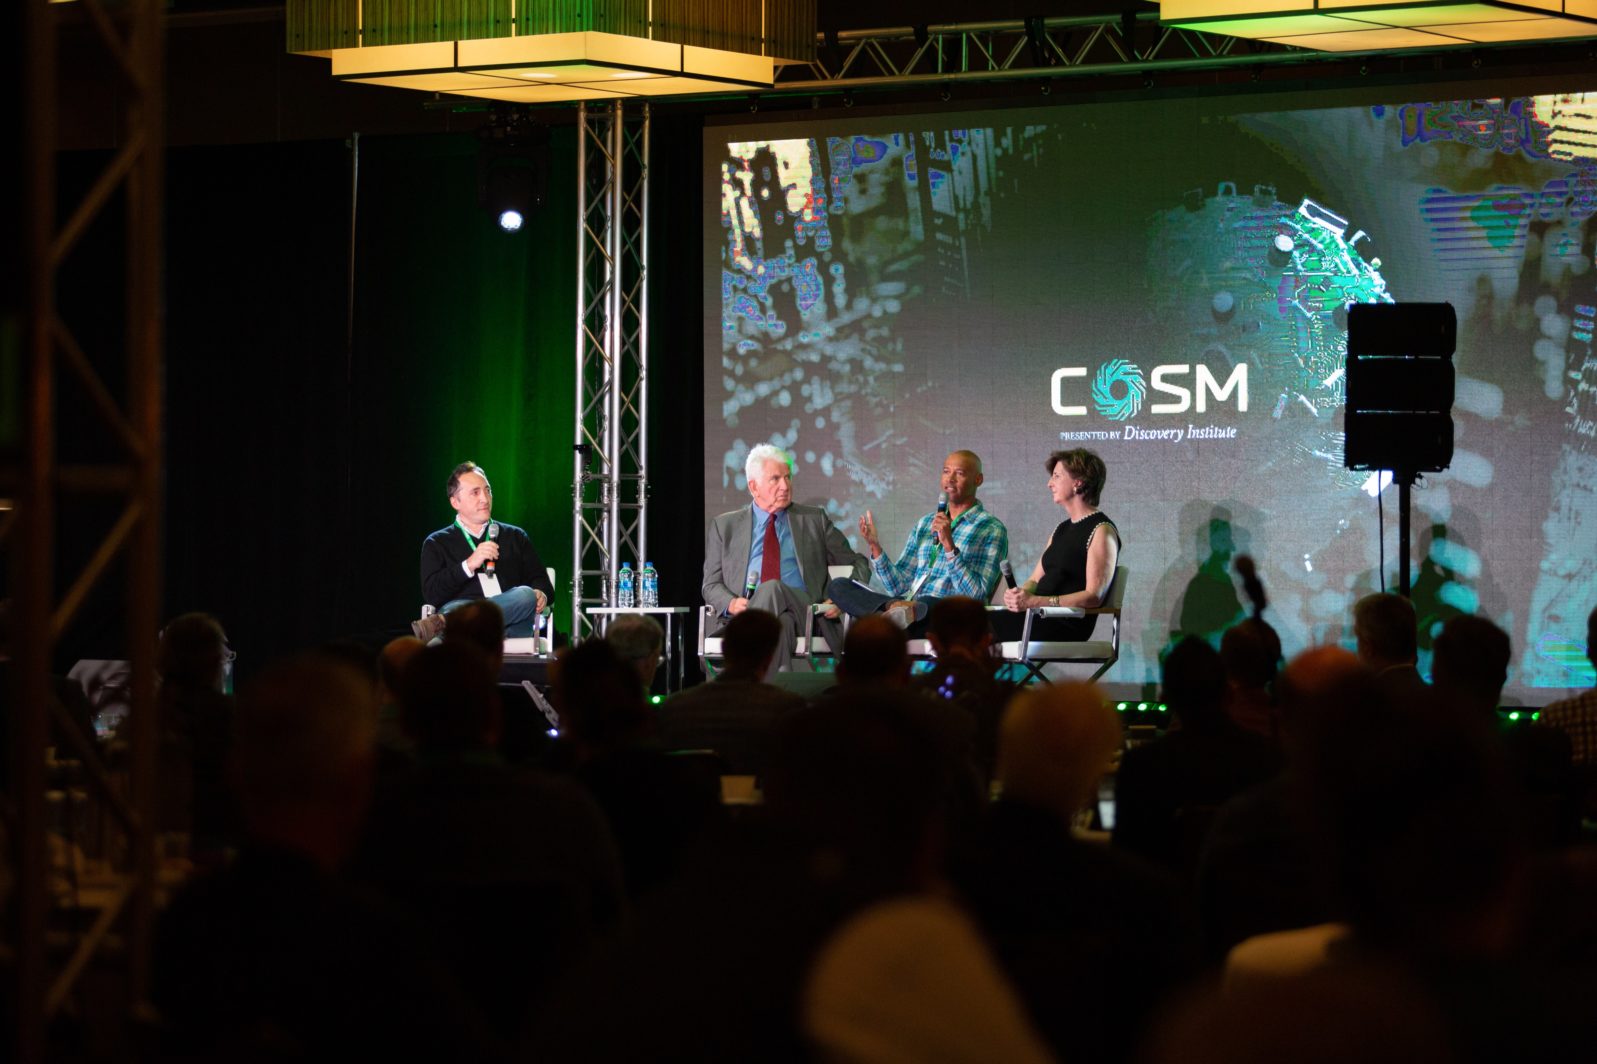 Walter Myers III at COSM 2021 on Silicon Valley